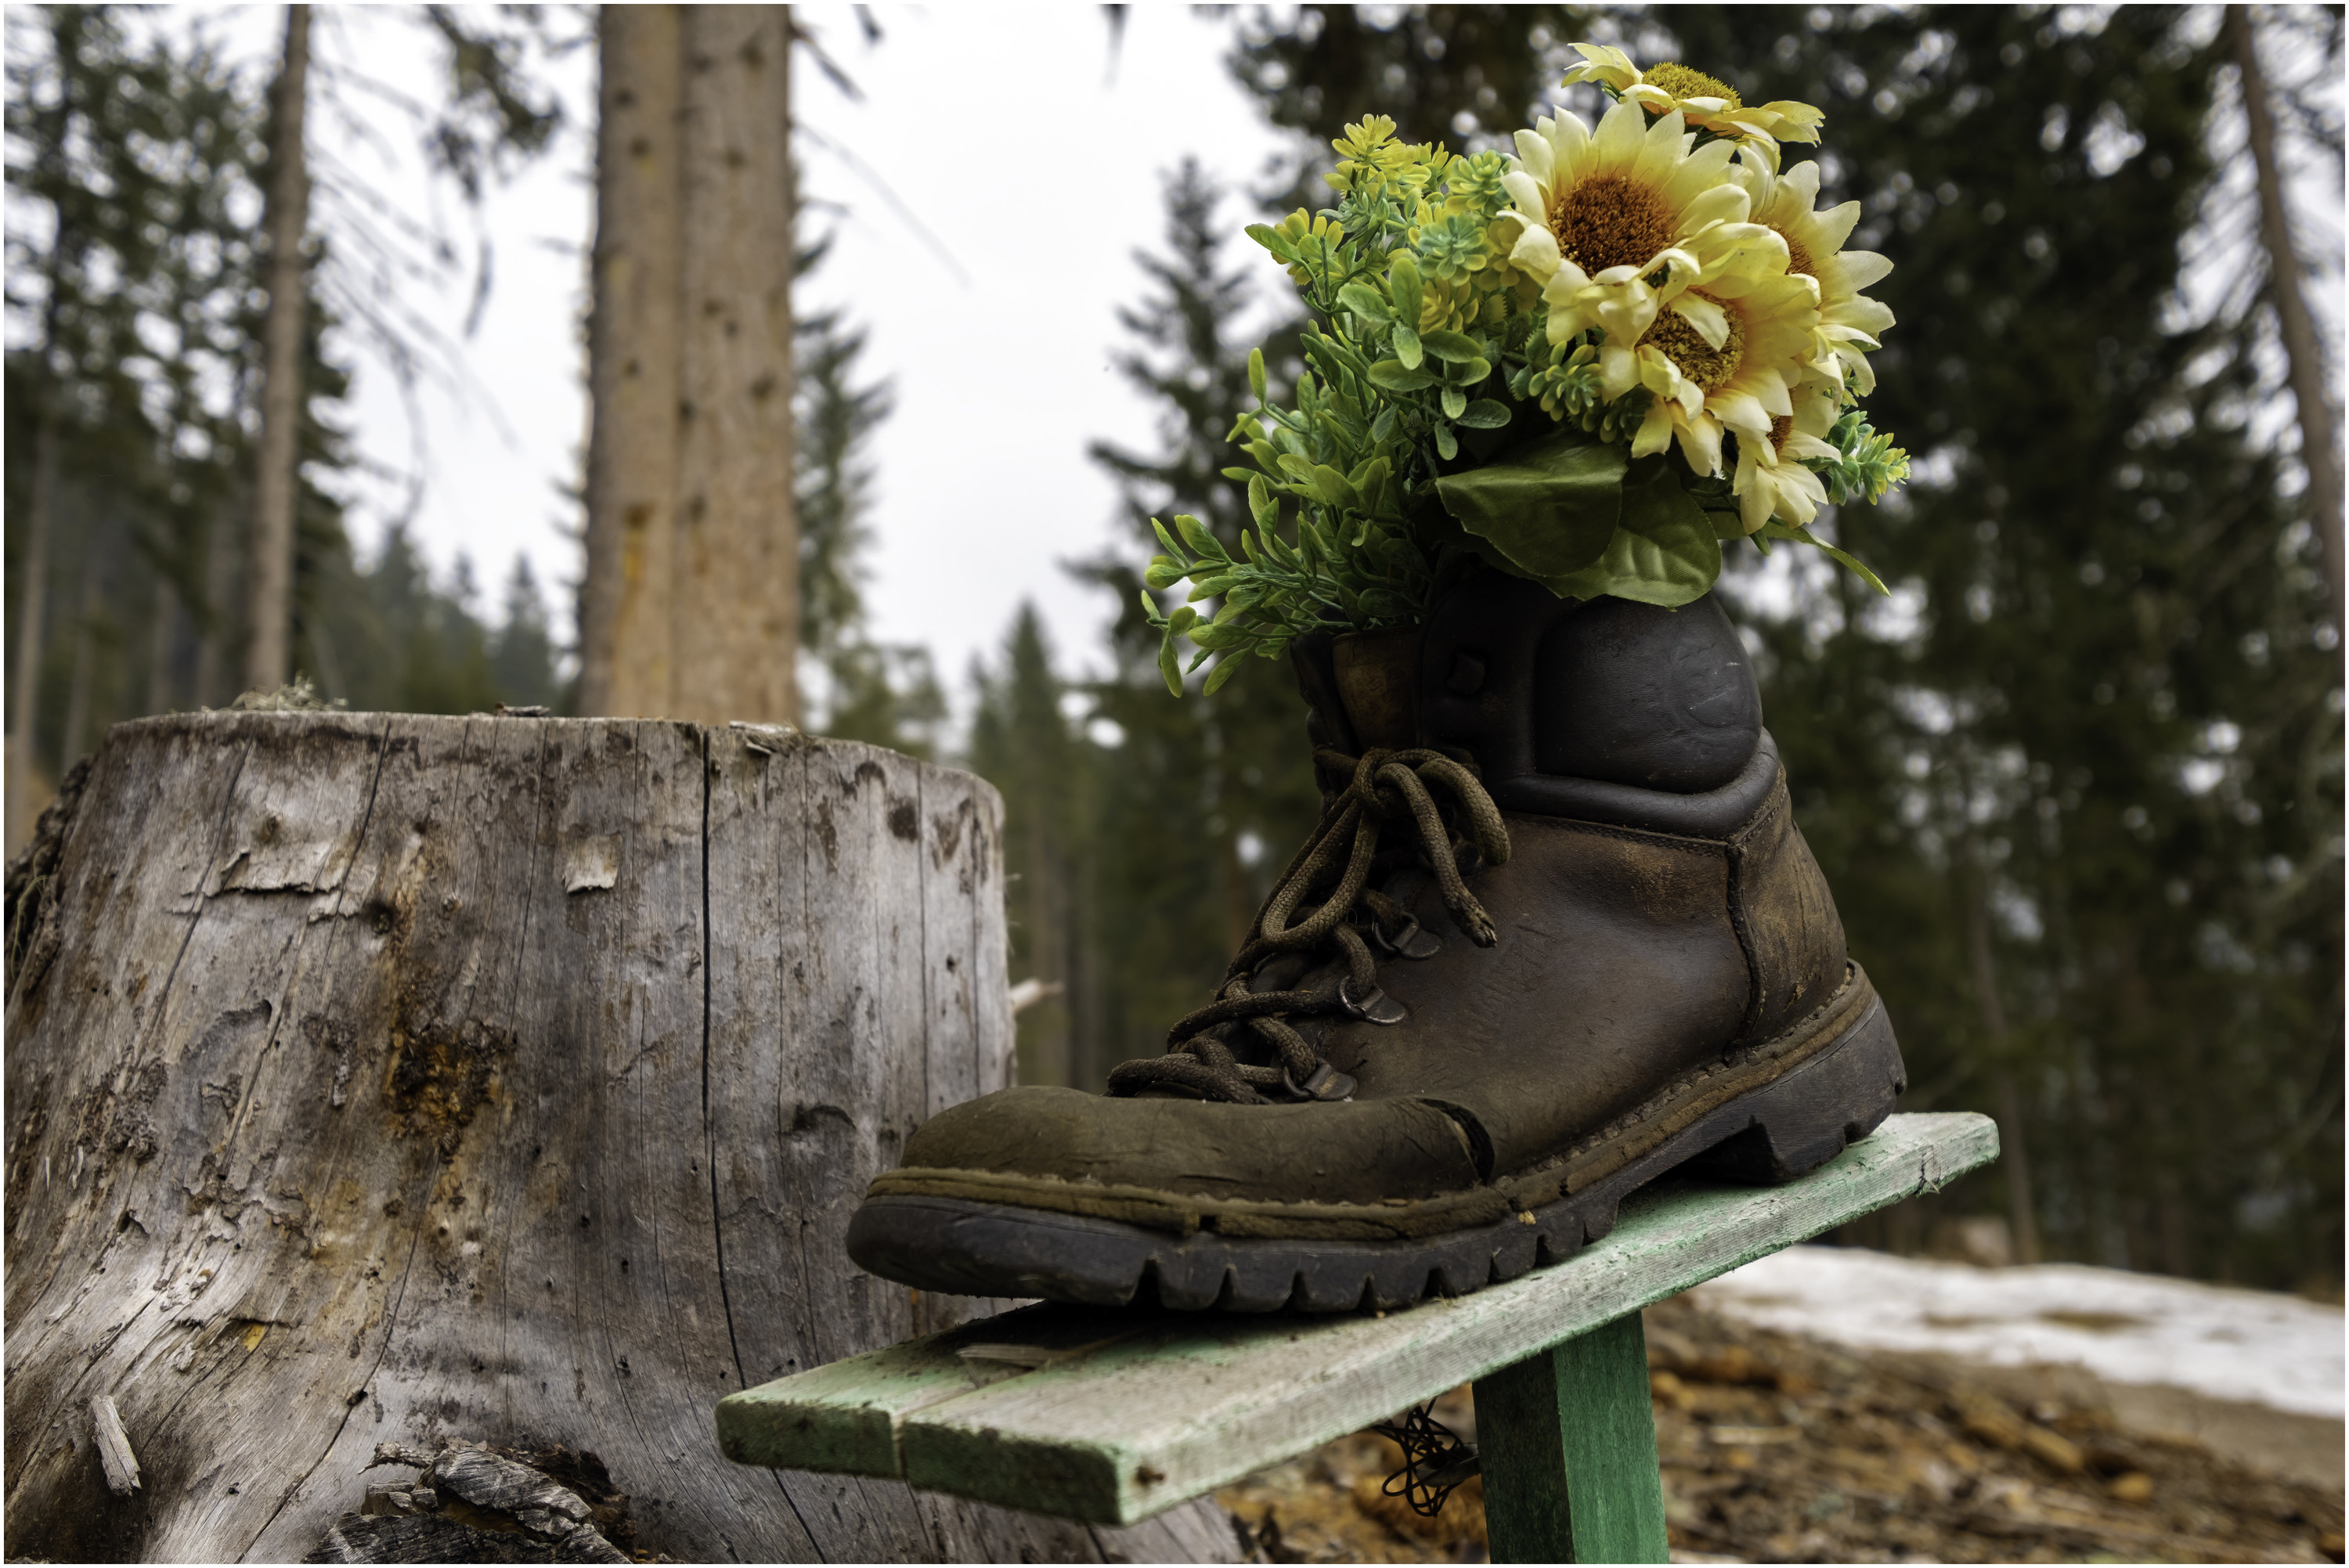 A worn-out boot atop a plank of wood with flowers sticking out from the top